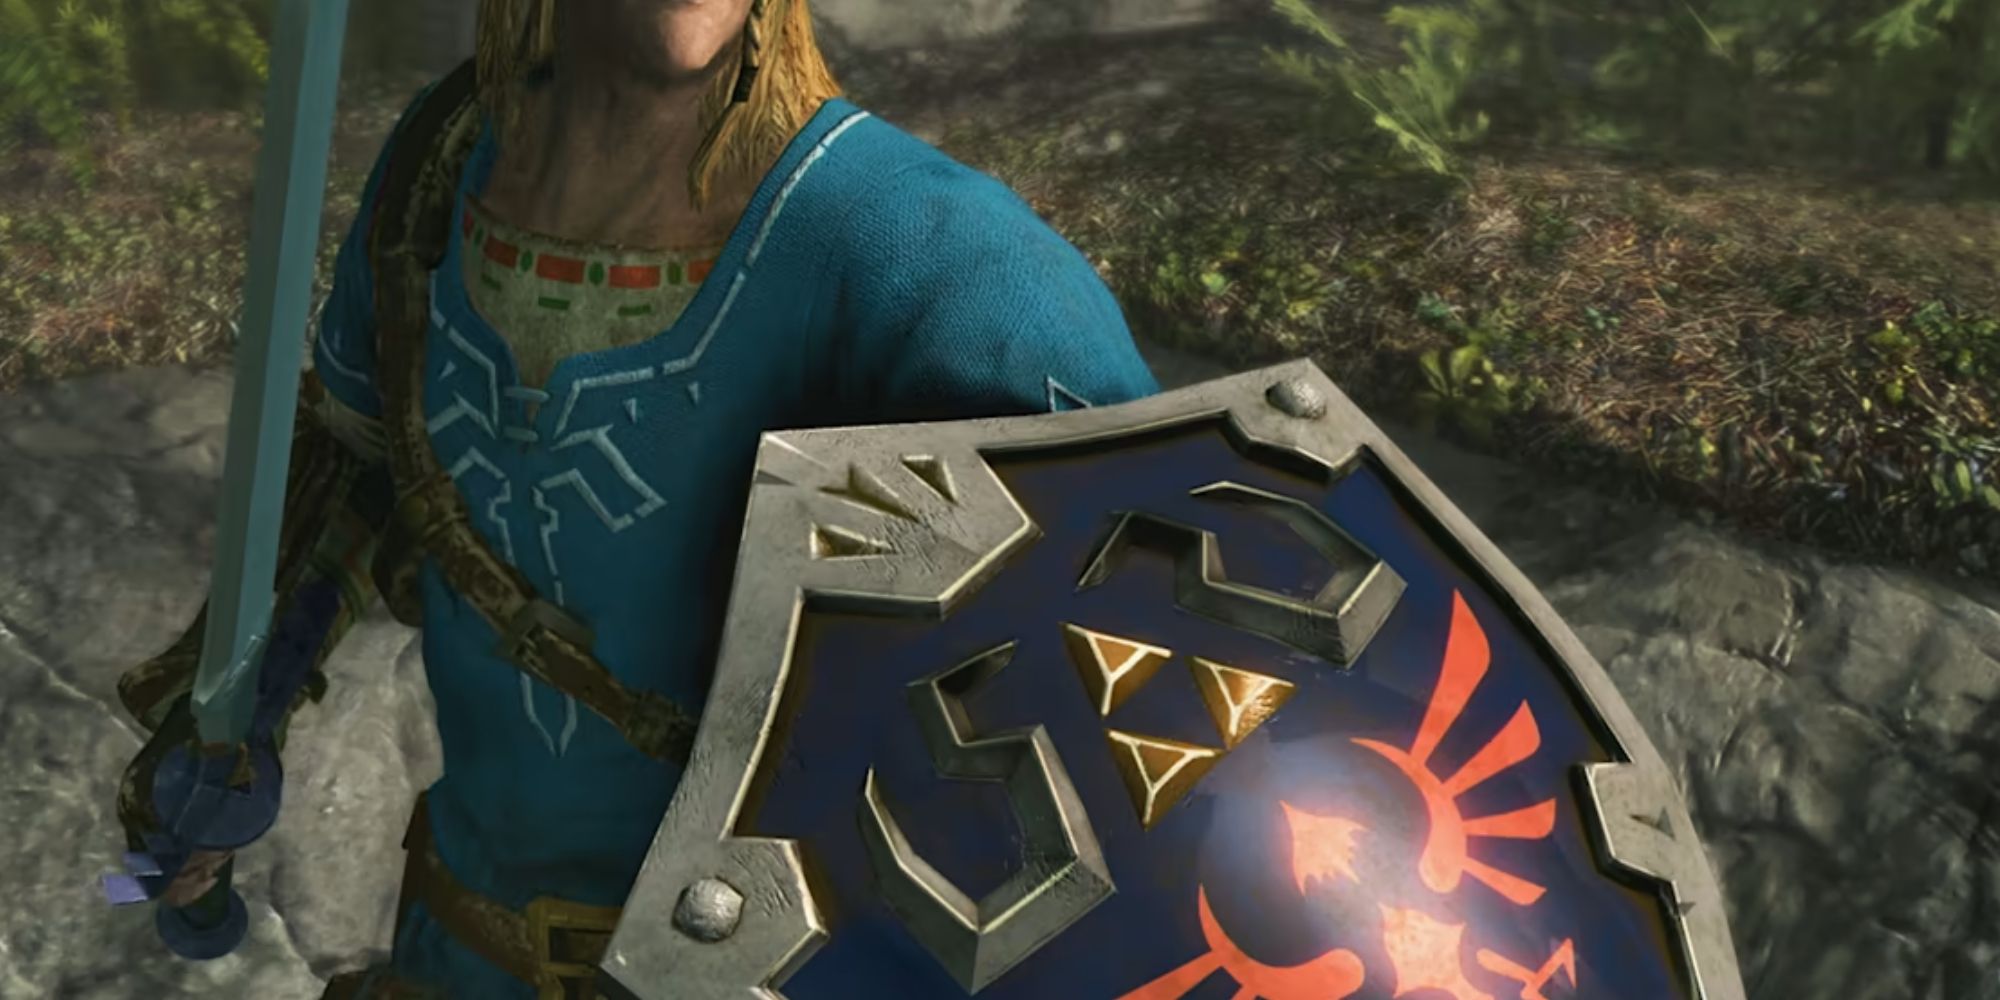 Skyrim player wearing Links clothes holding the Hylian Shield and weilding the Master Sword from Zelda